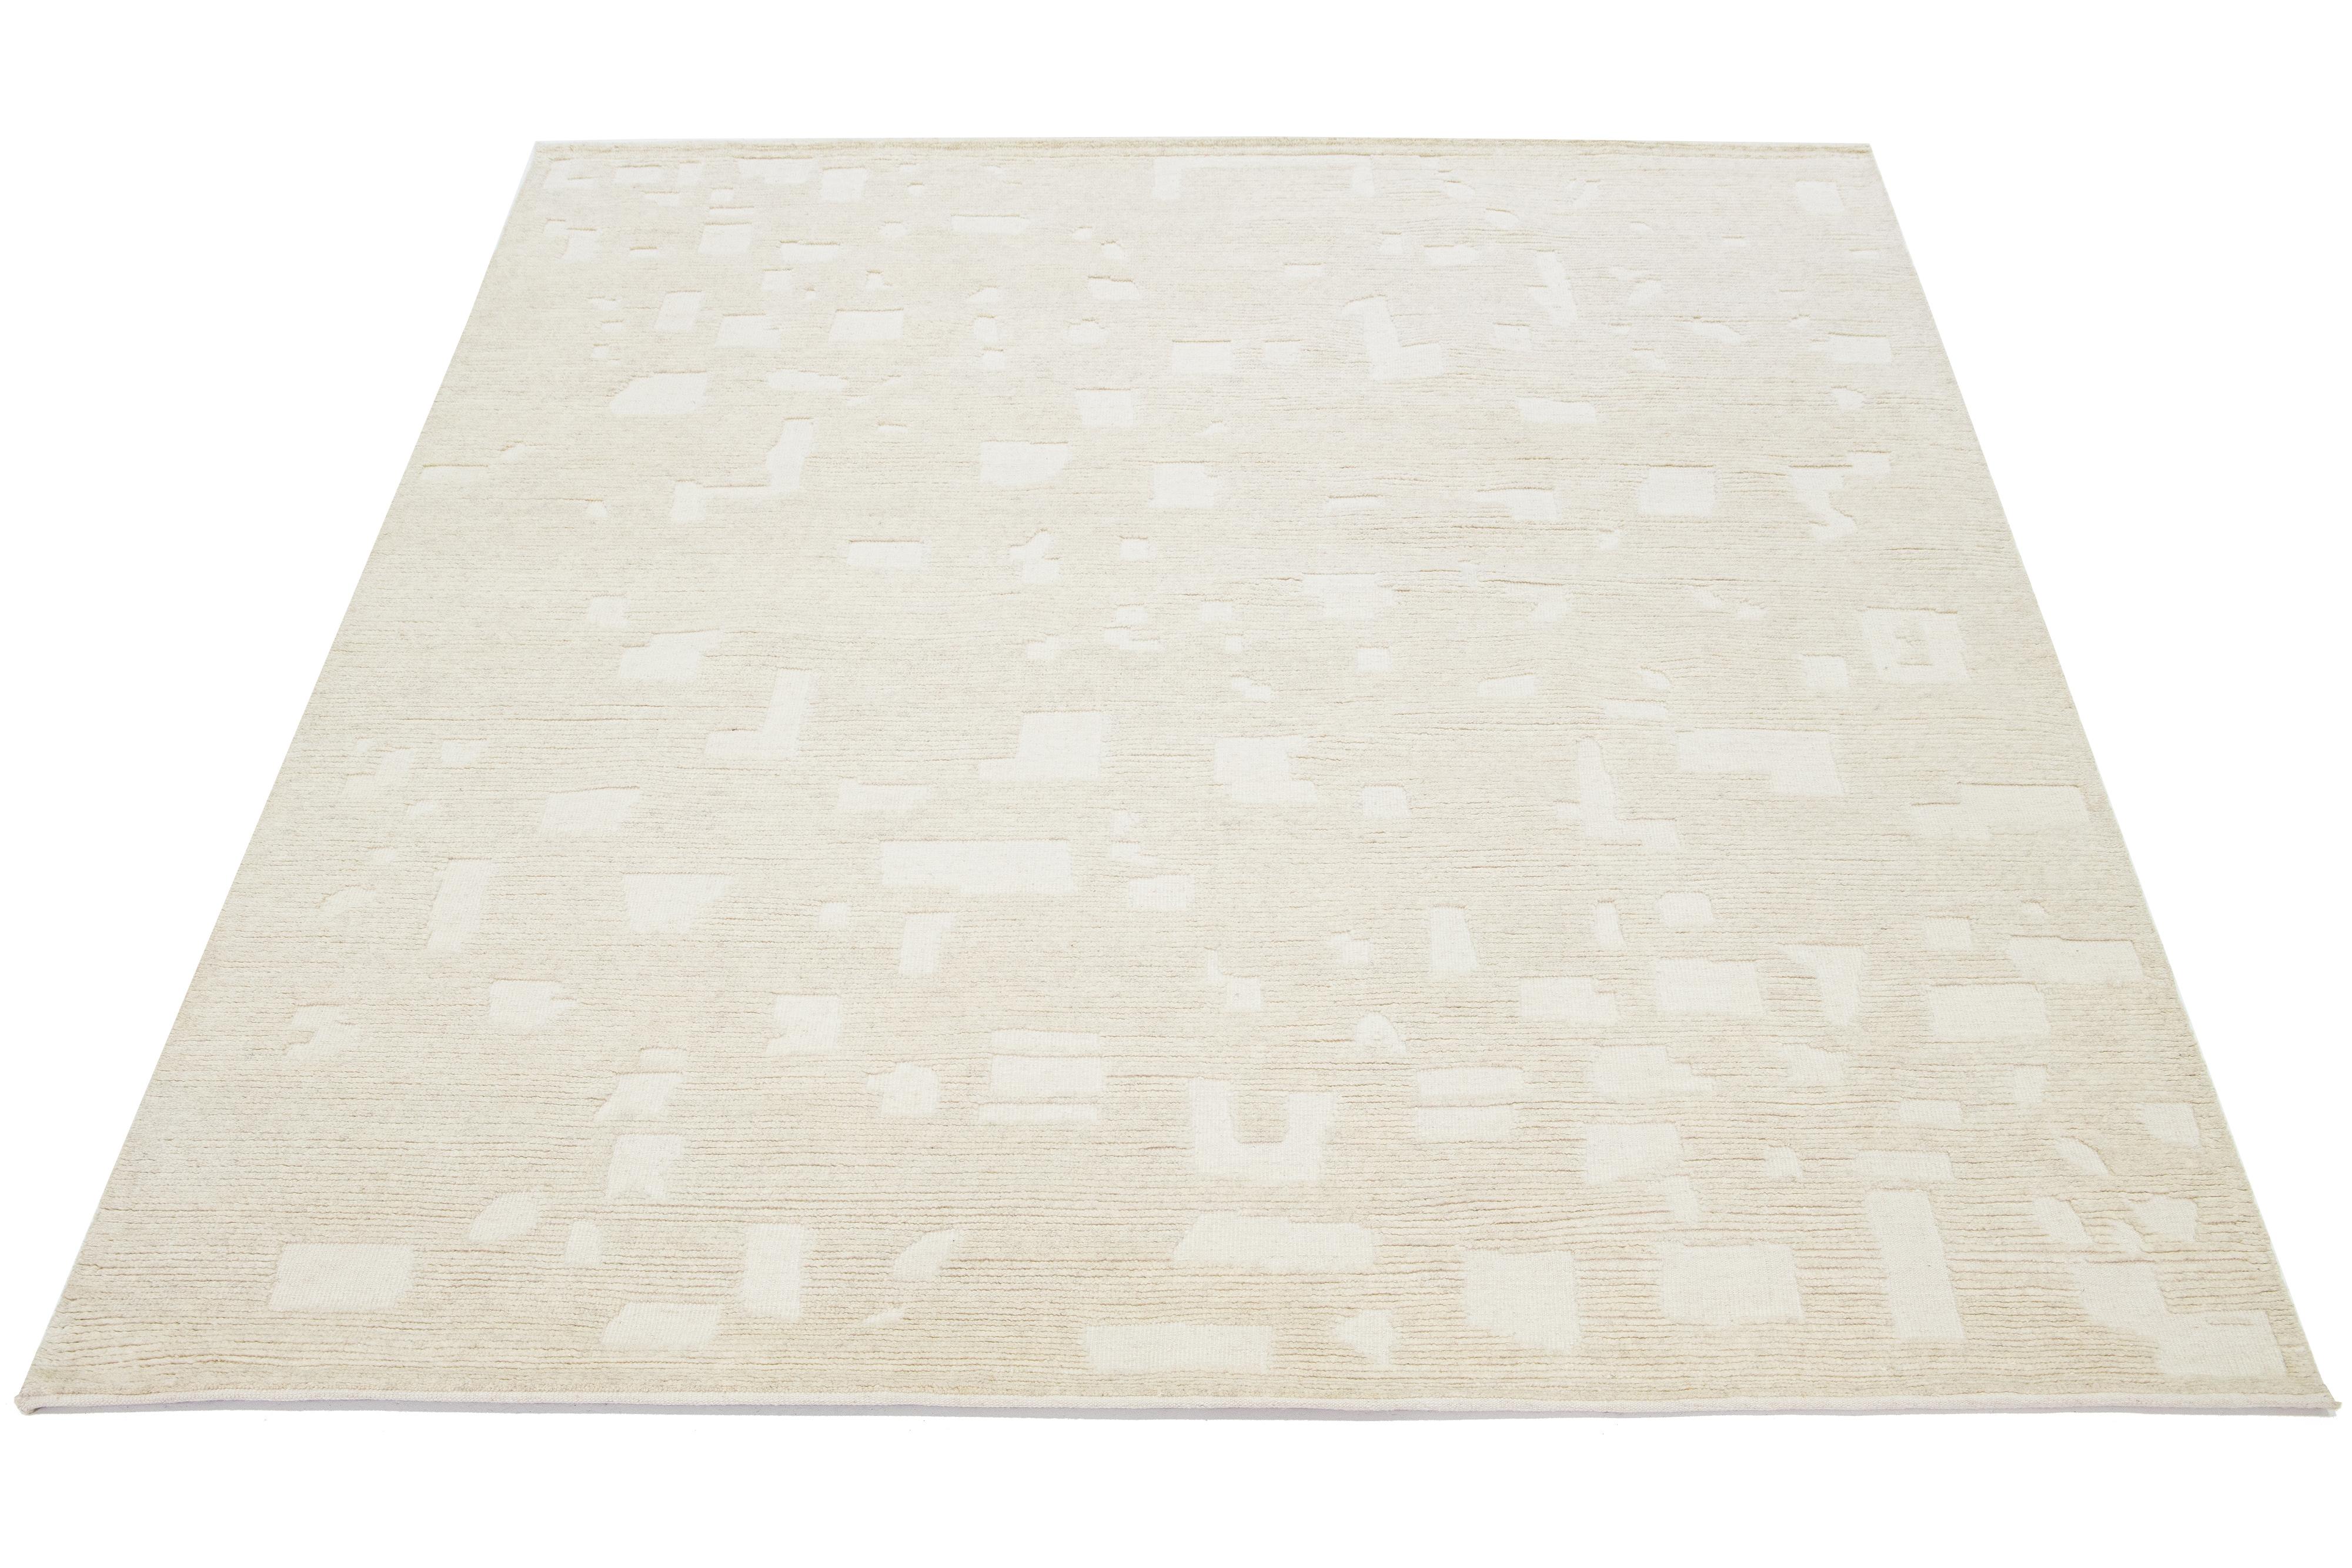 Featuring a contemporary design on a natural ivory background, this hand-knotted Moroccan-style wool rug beautifully showcases a mesmerizing minimalist aesthetic.

This rug measures 8'1